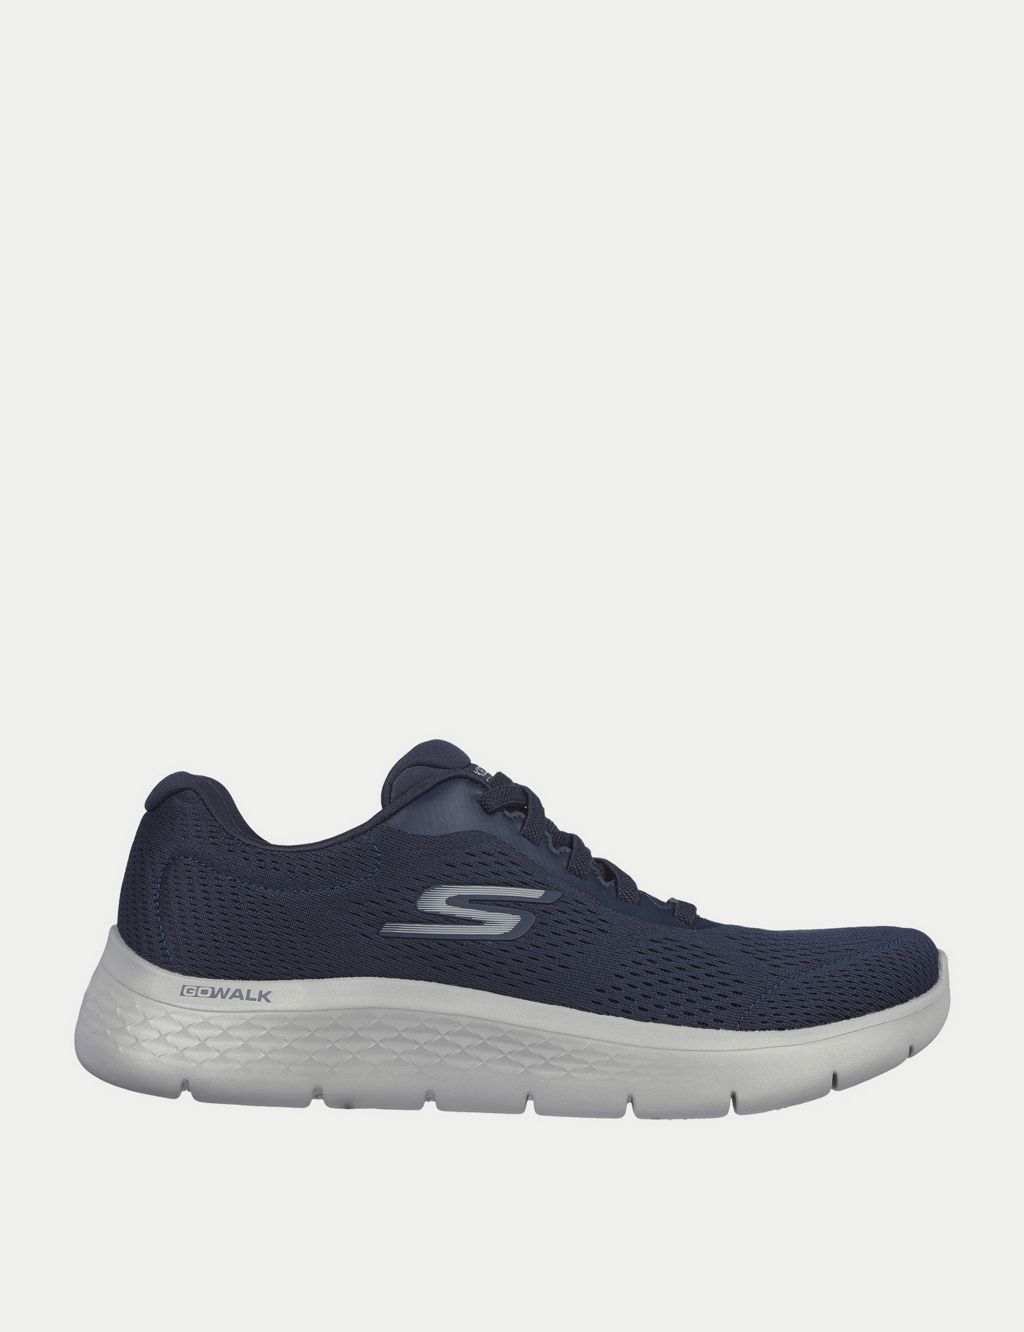 GO WALK Flex Remark Lace Up Trainers image 1